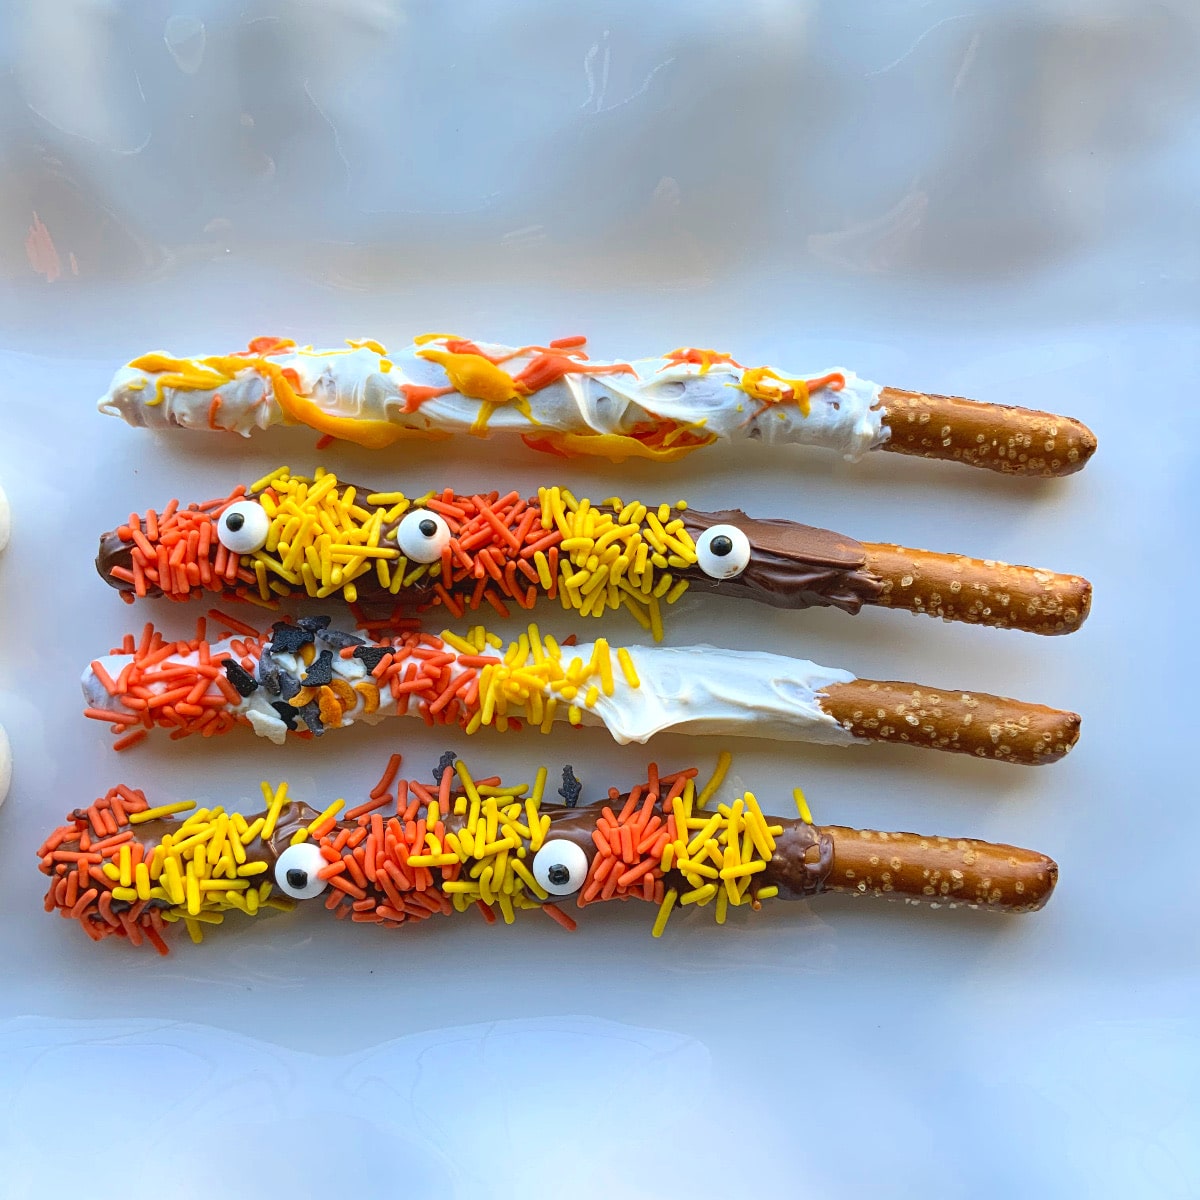 4 pretzel rods covered in melting chocolate, orange and yellow sprinkles and candy eyes